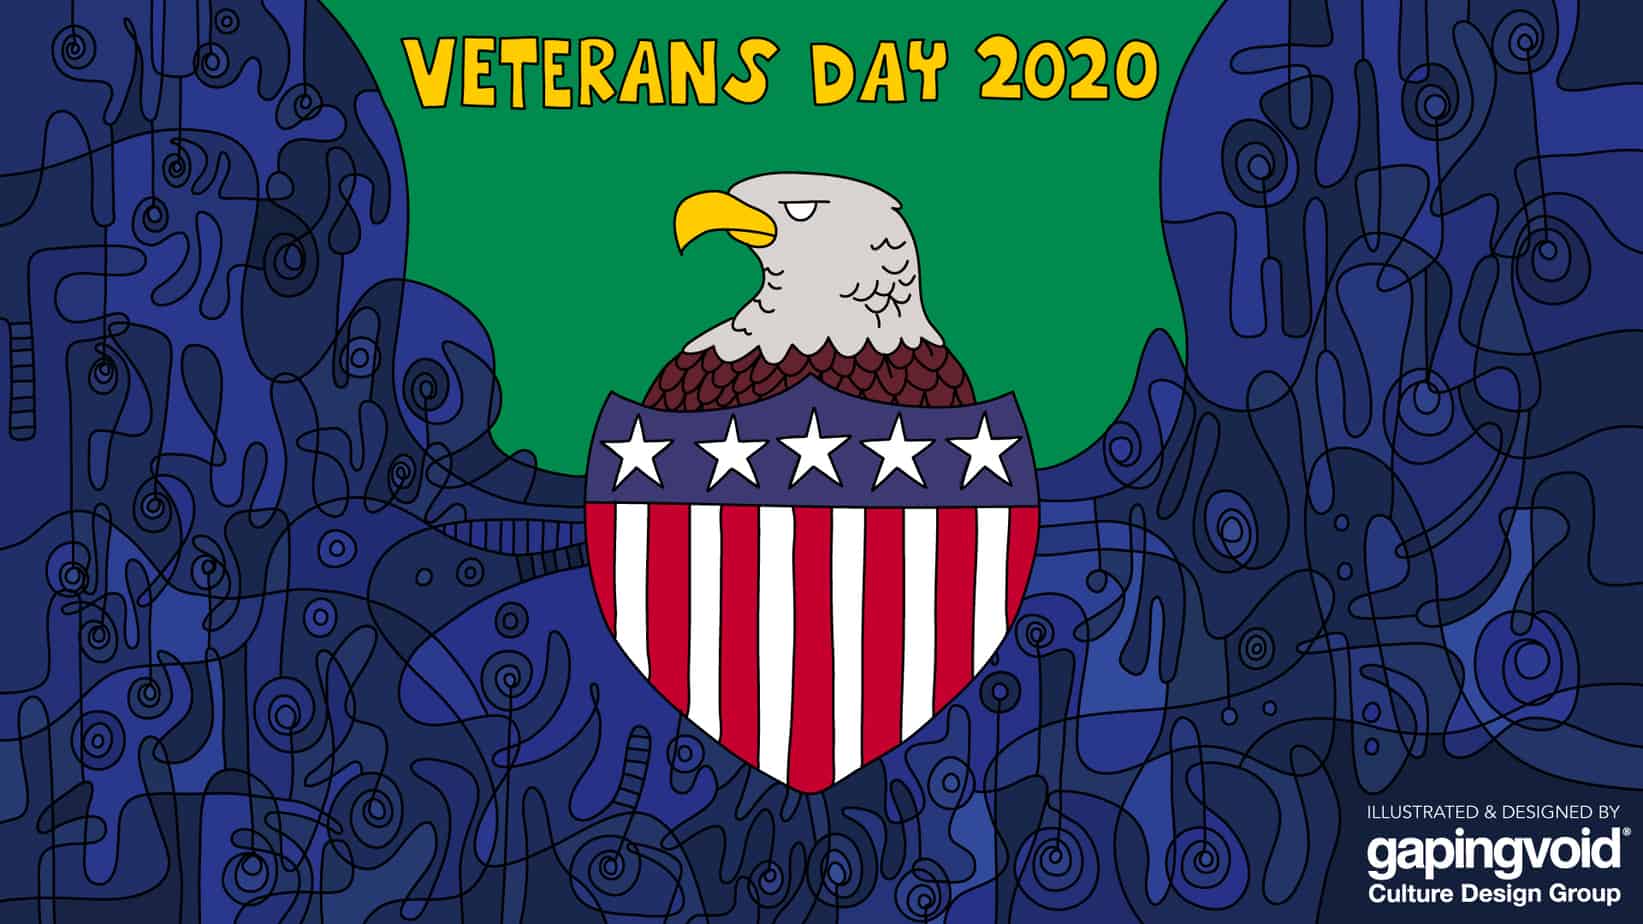 sustainable movements; Veterans Day 2020